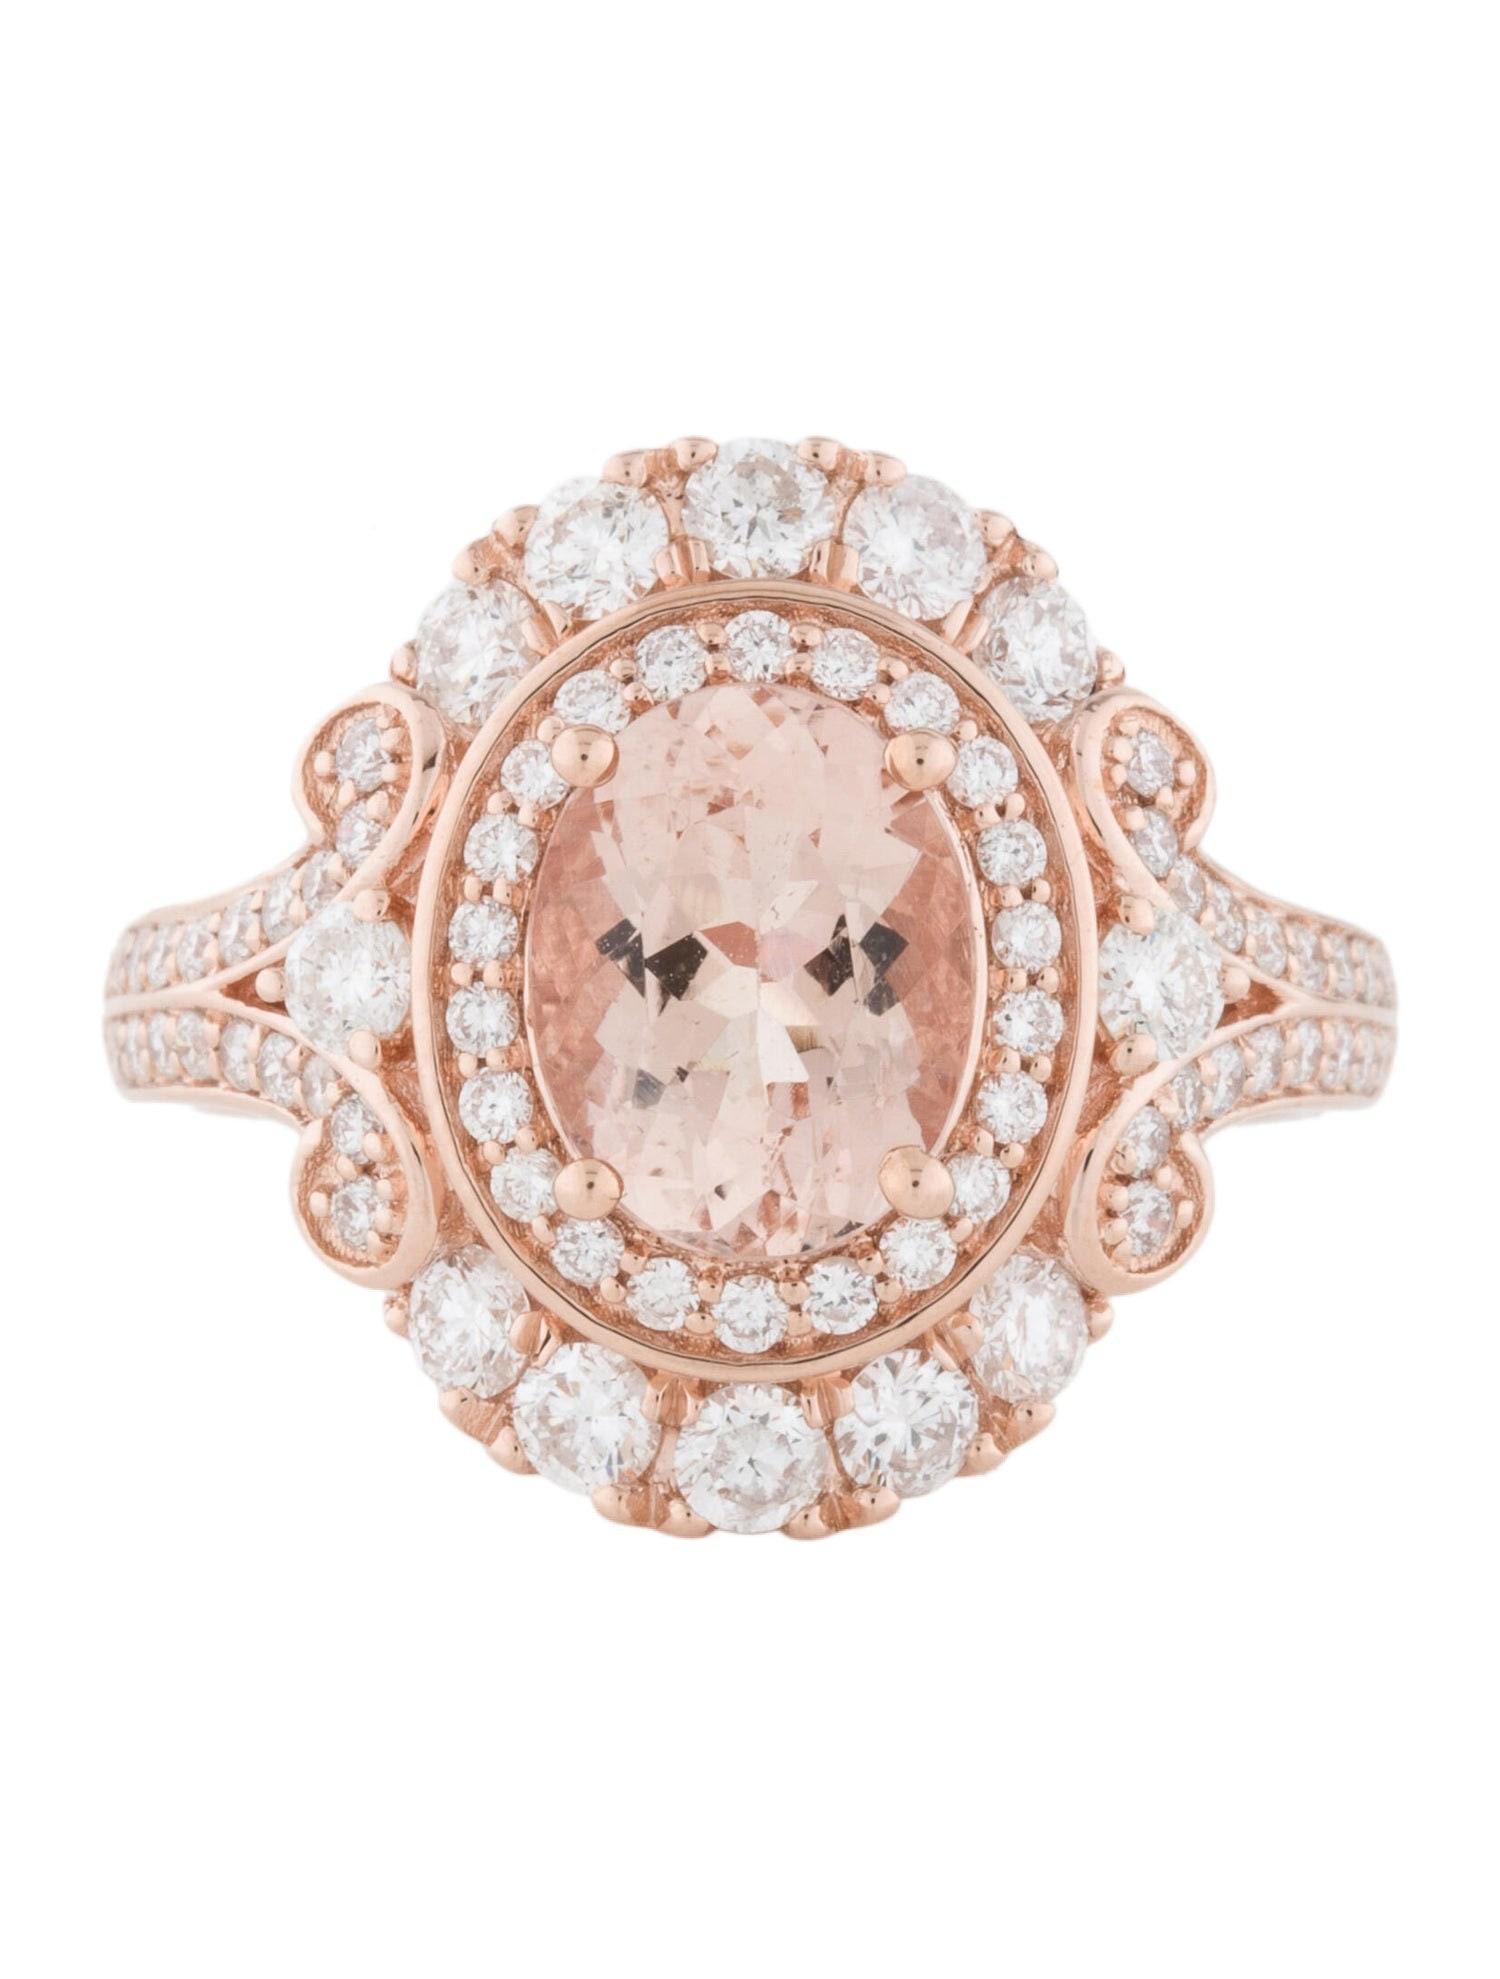 This is a Victorian age looking oval-shaped natural 1.73 Ct morganite and diamond ring set in solid 14K rose gold. This ring features a magnificent natural oval 1.73 Carat morganite stone with excellent clear color (AAA quality gem) surrounded on